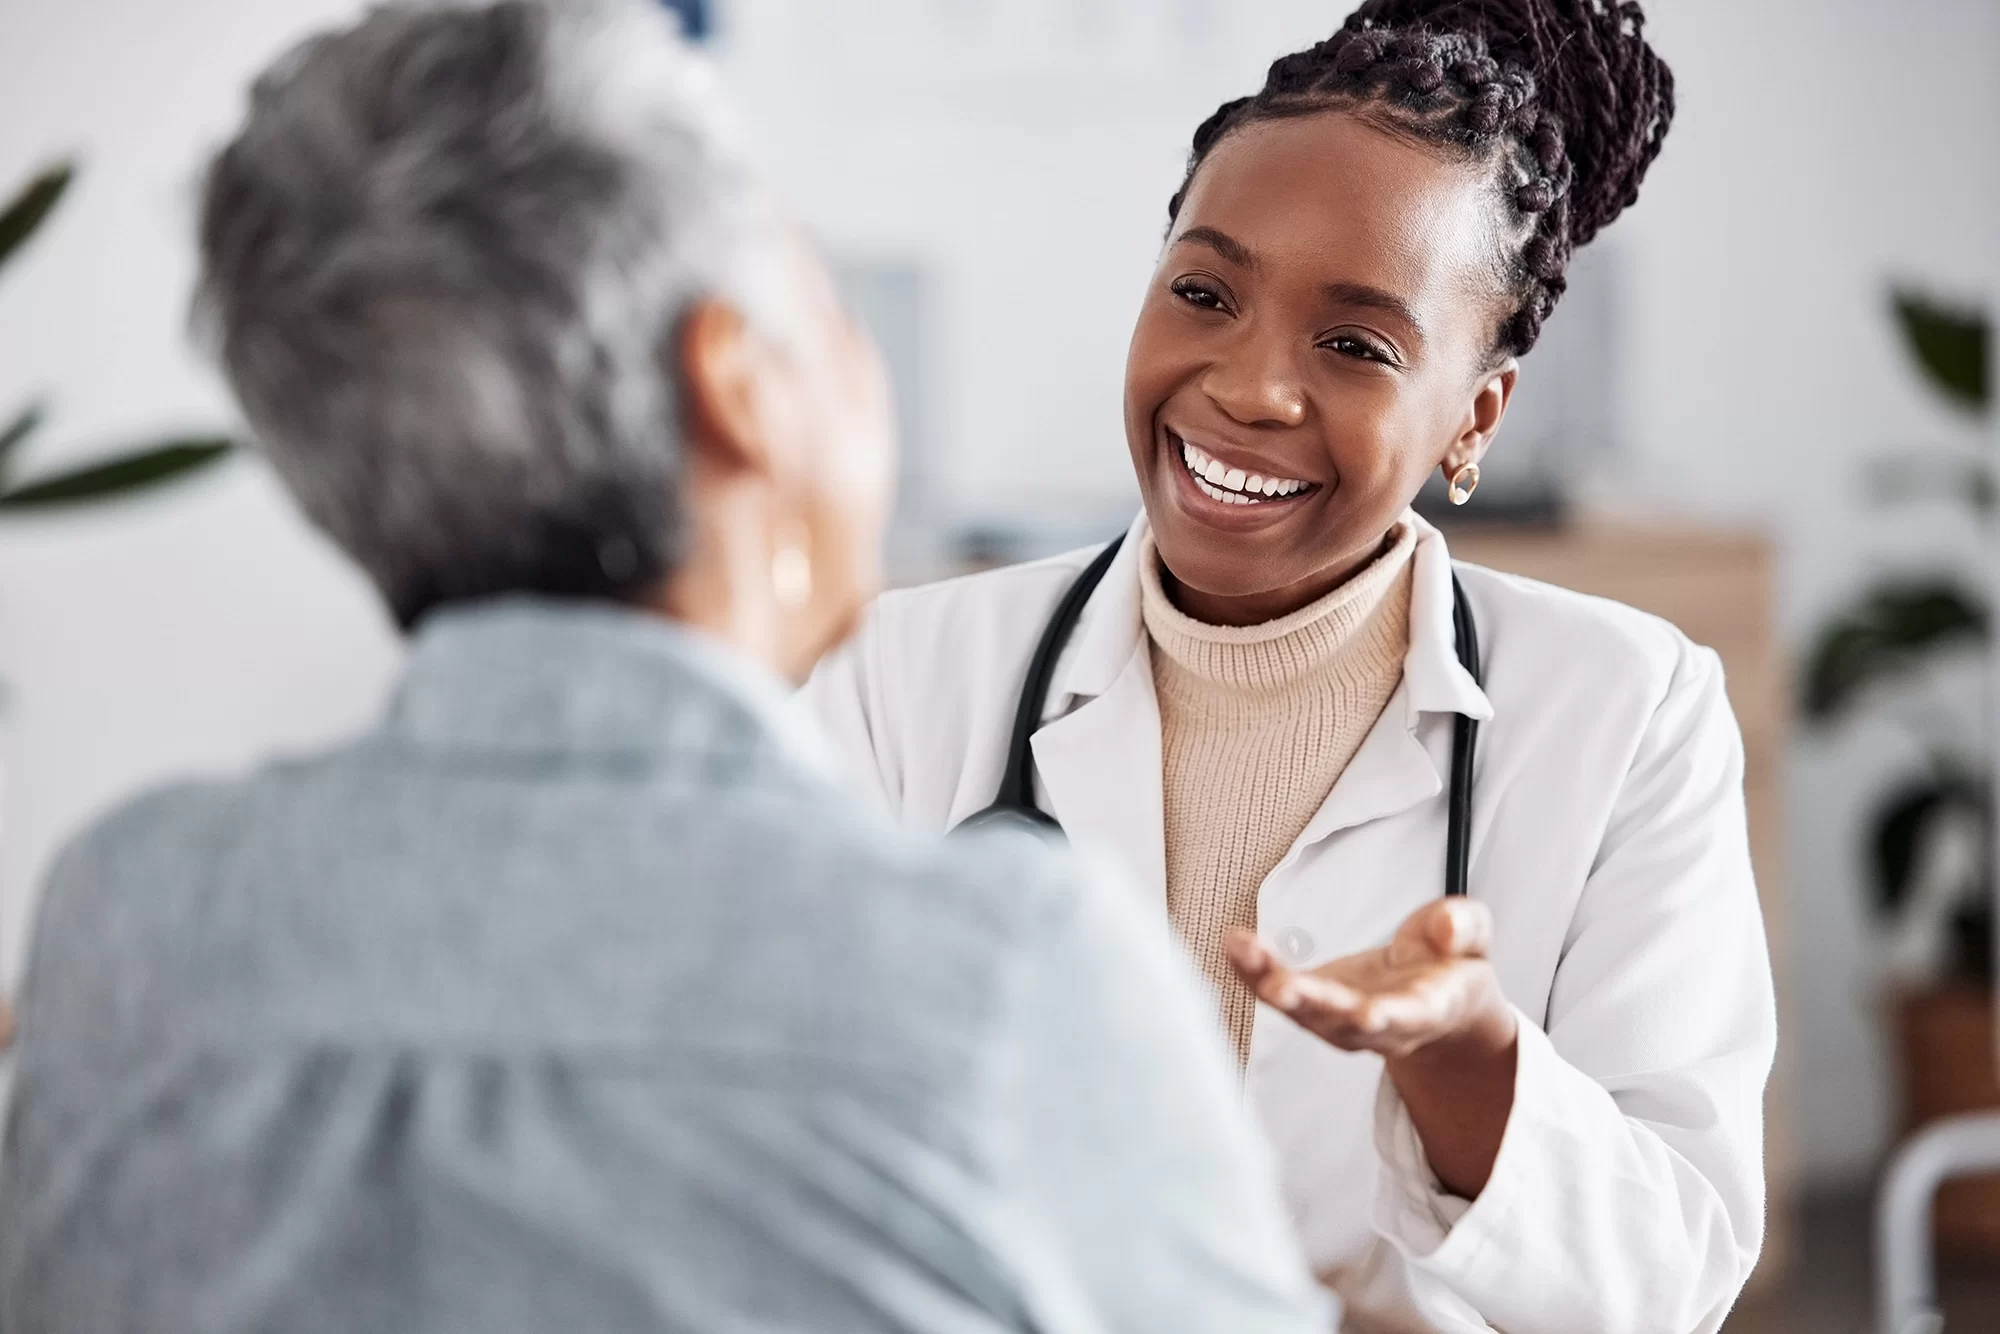 A smiling doctor talks to her patient.